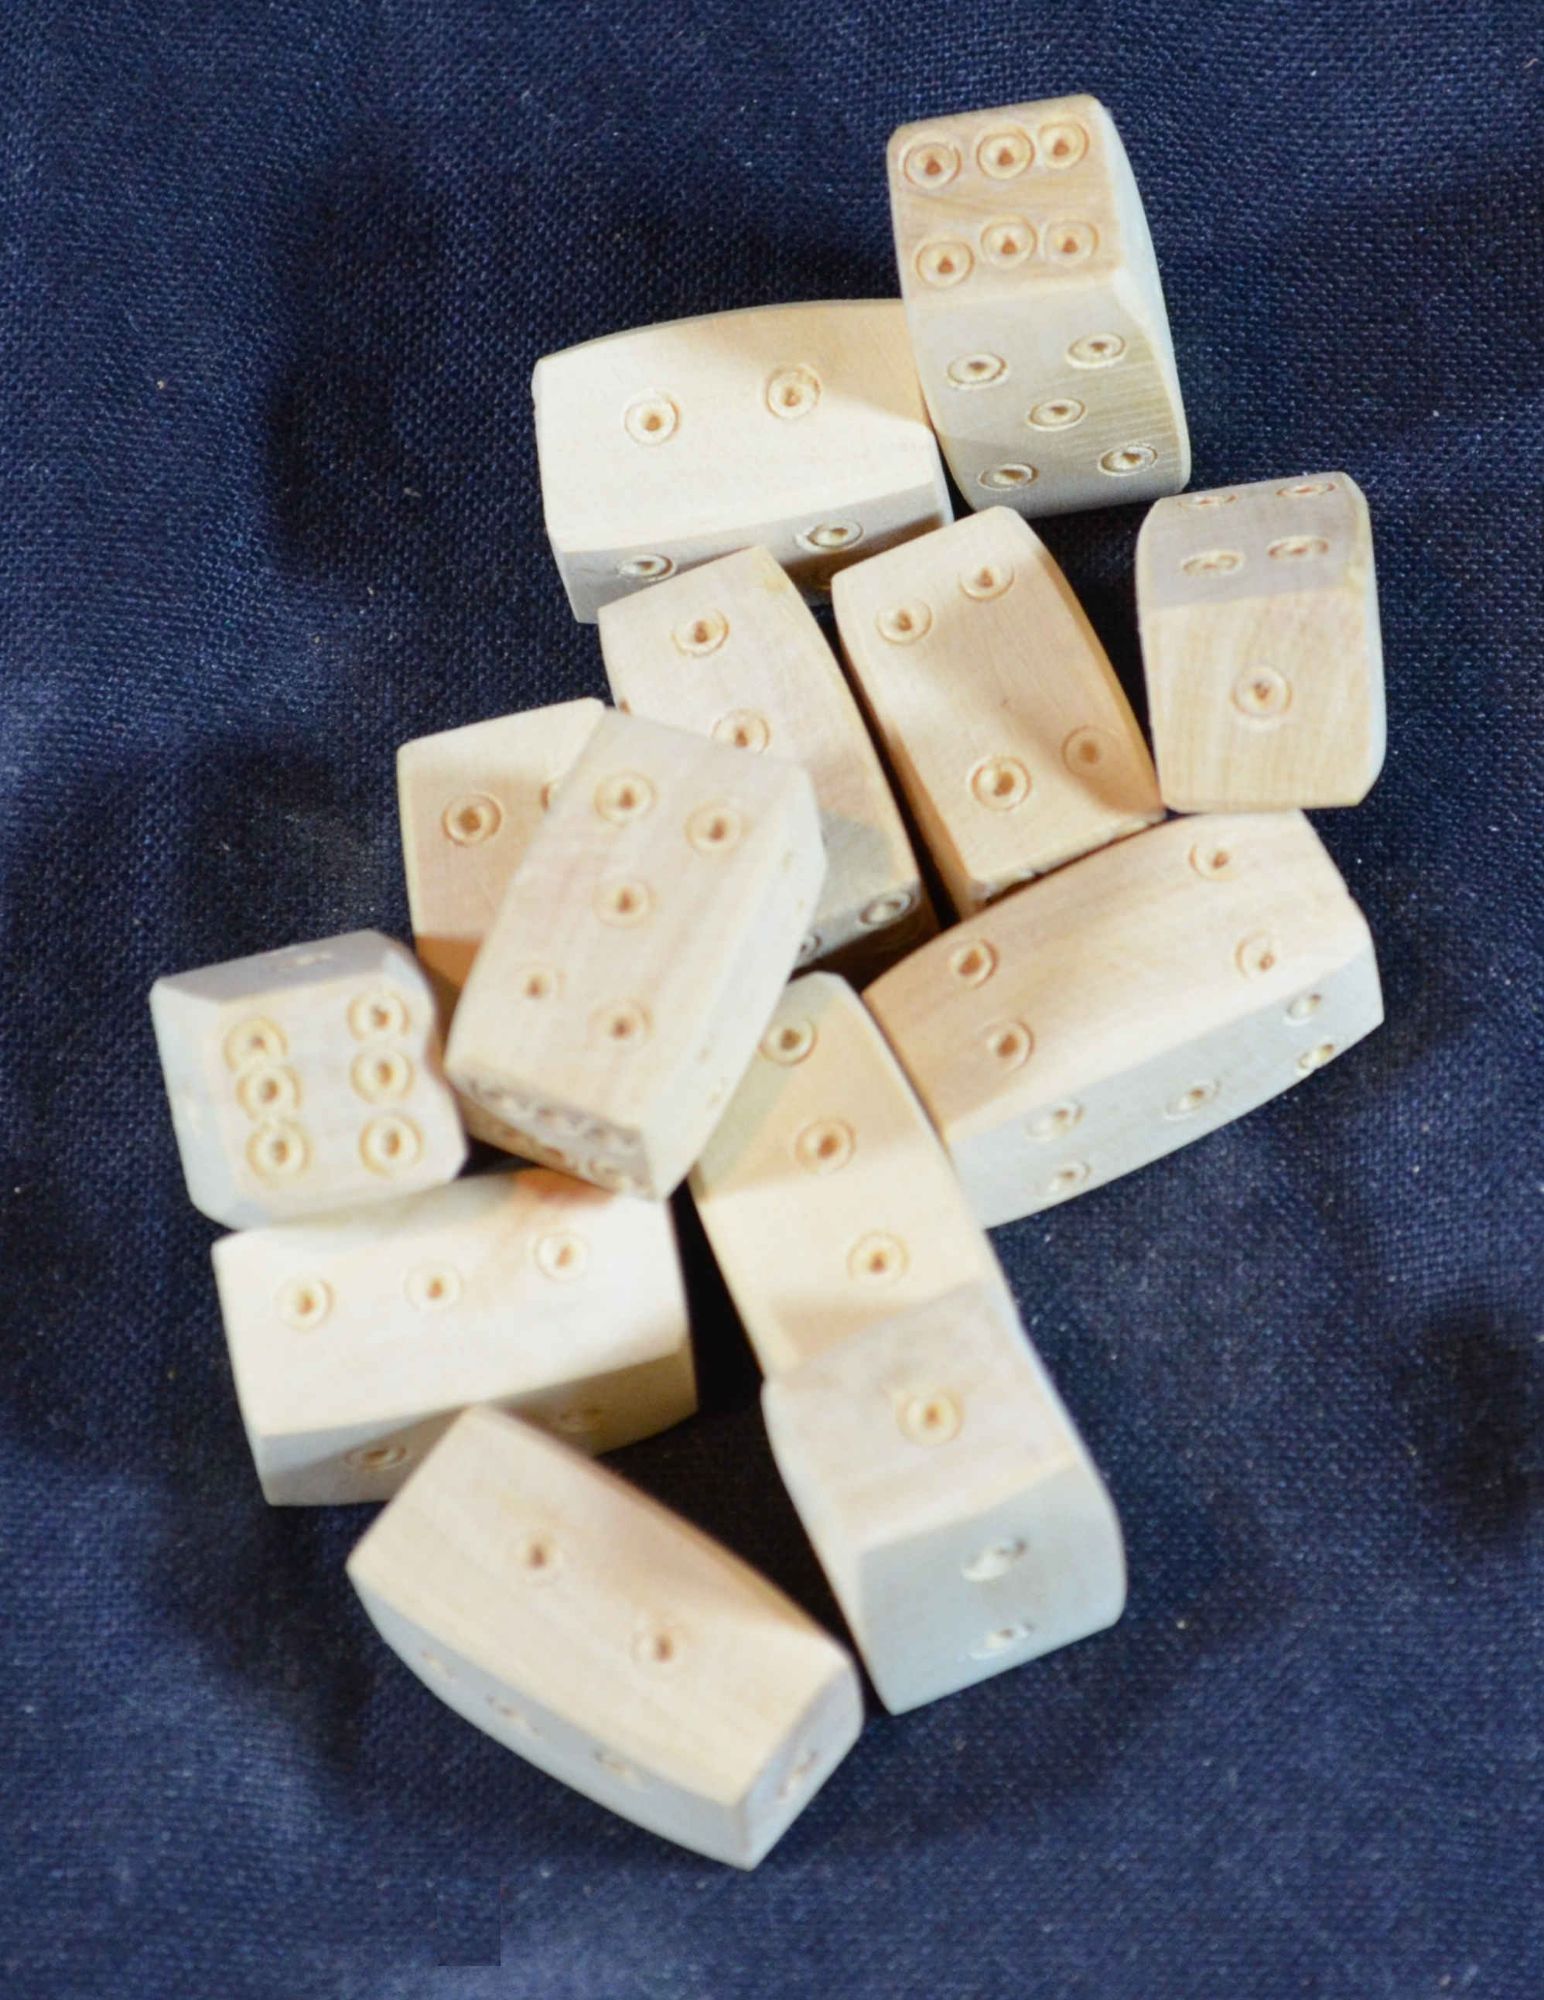 Several reproduction boxwood Viking long dice from The Historic Games Shop